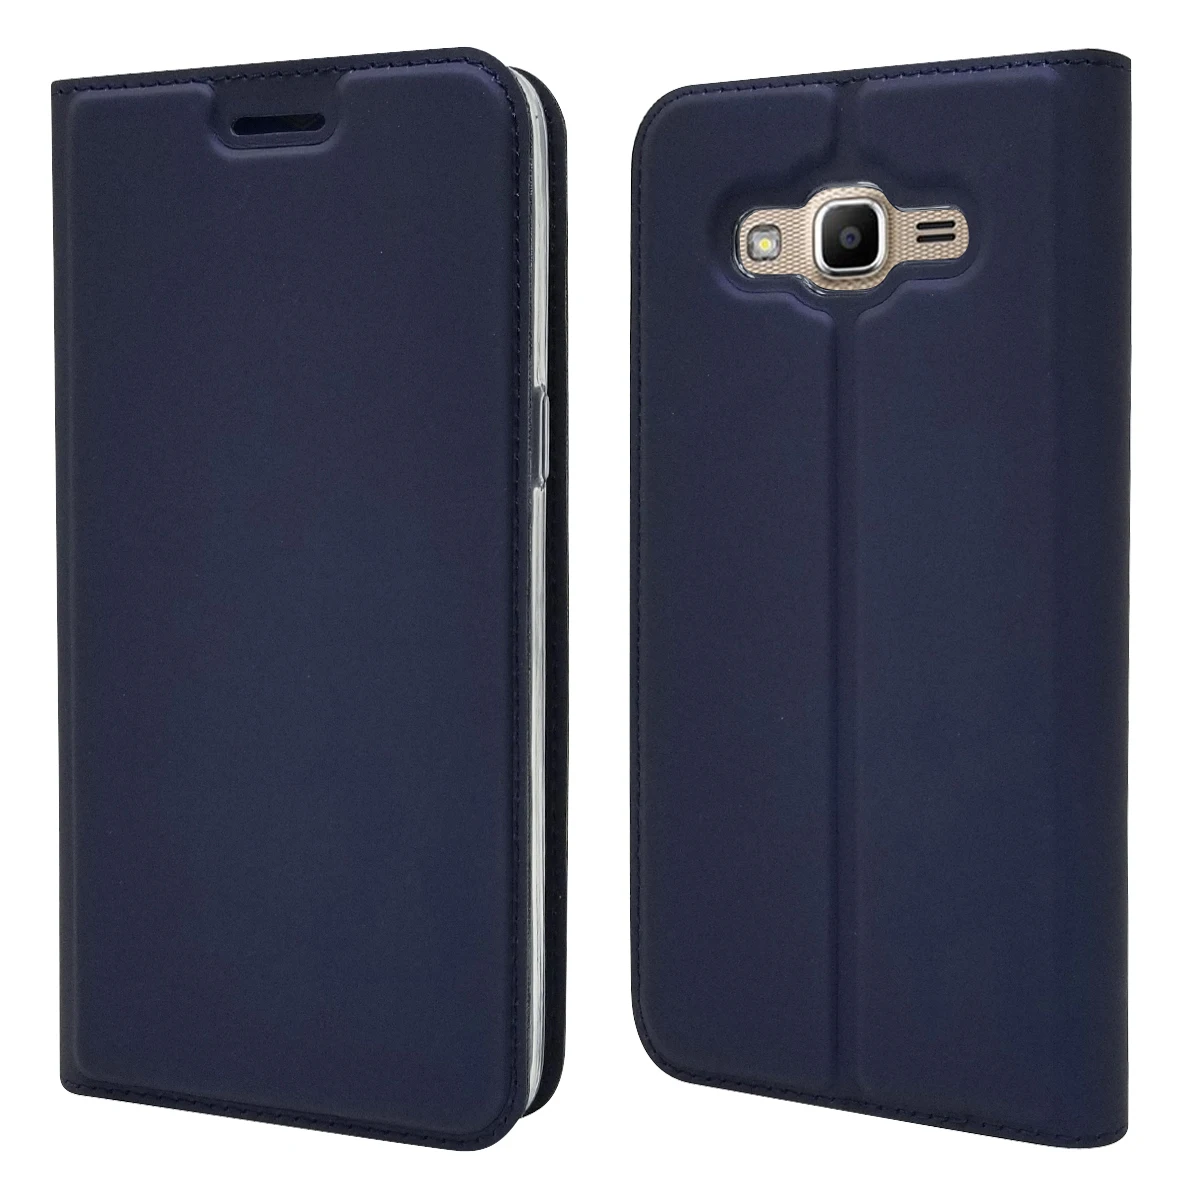 5.0" Case for Capa Samsung Galaxy J2 Prime Case Cover G532F G532 SM-G532F Leather Wallet Phone Case for Samsung J2Prime Book